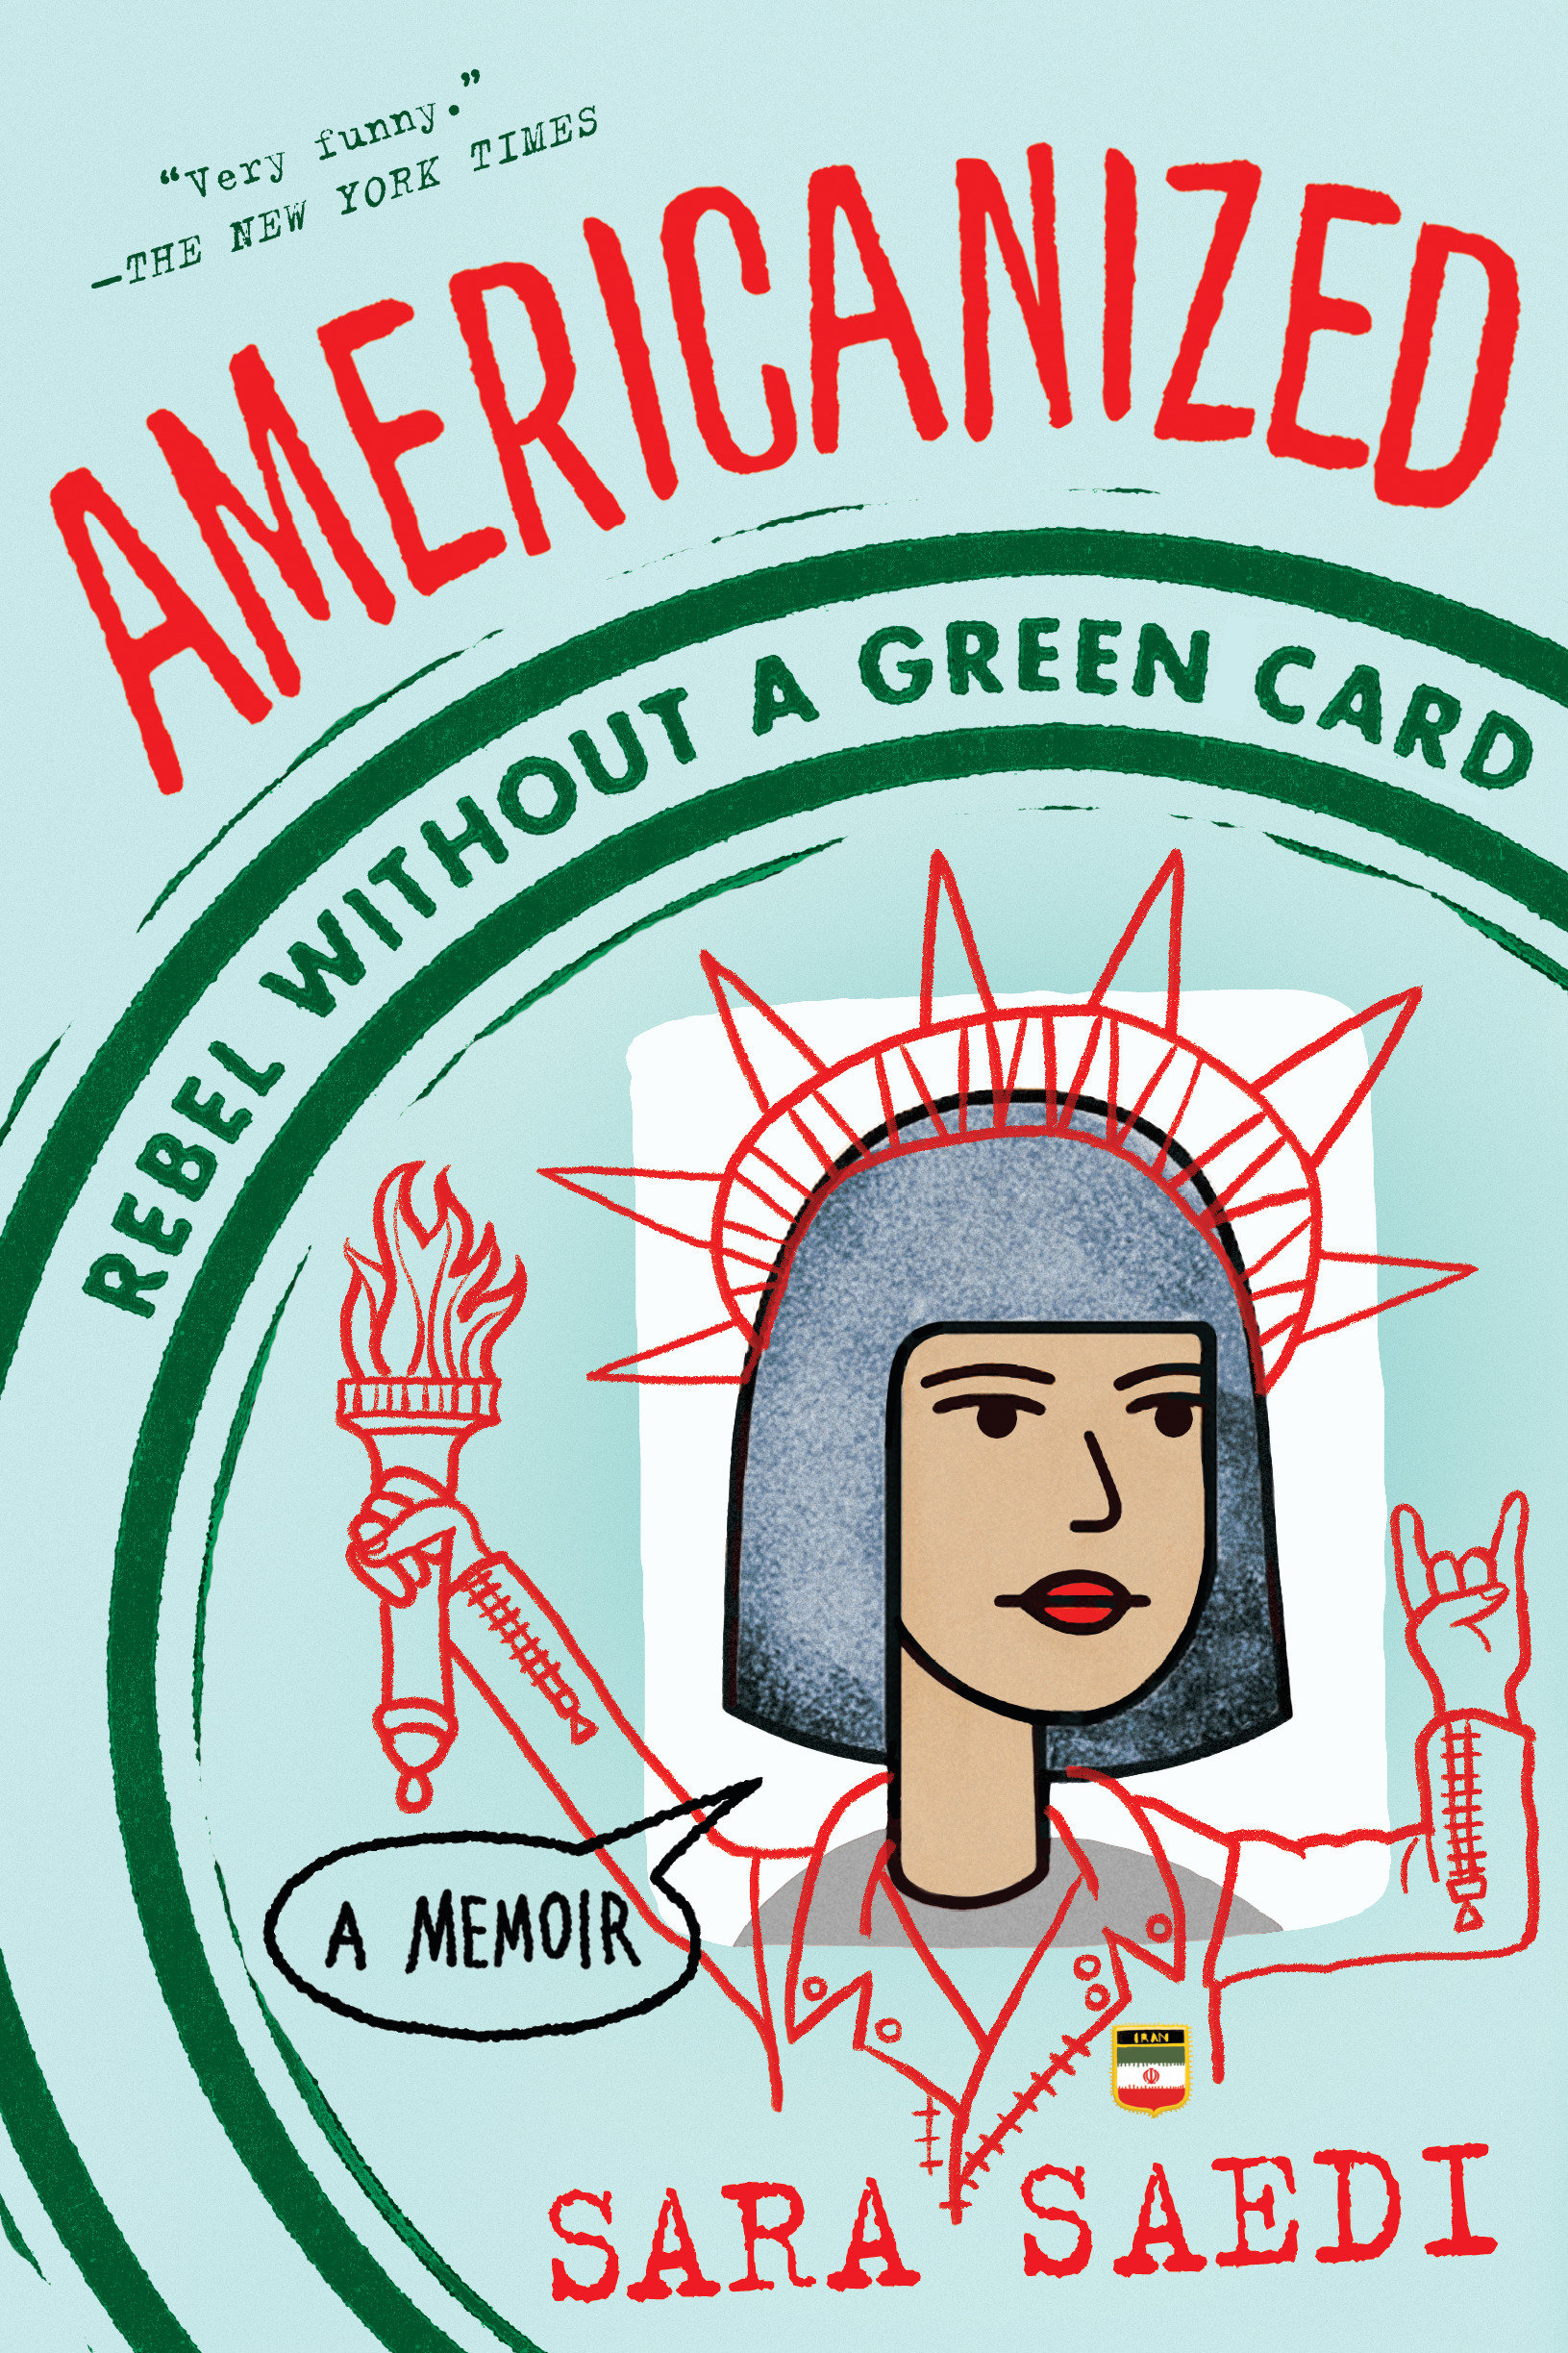 Americanized rebel without a green card cover image